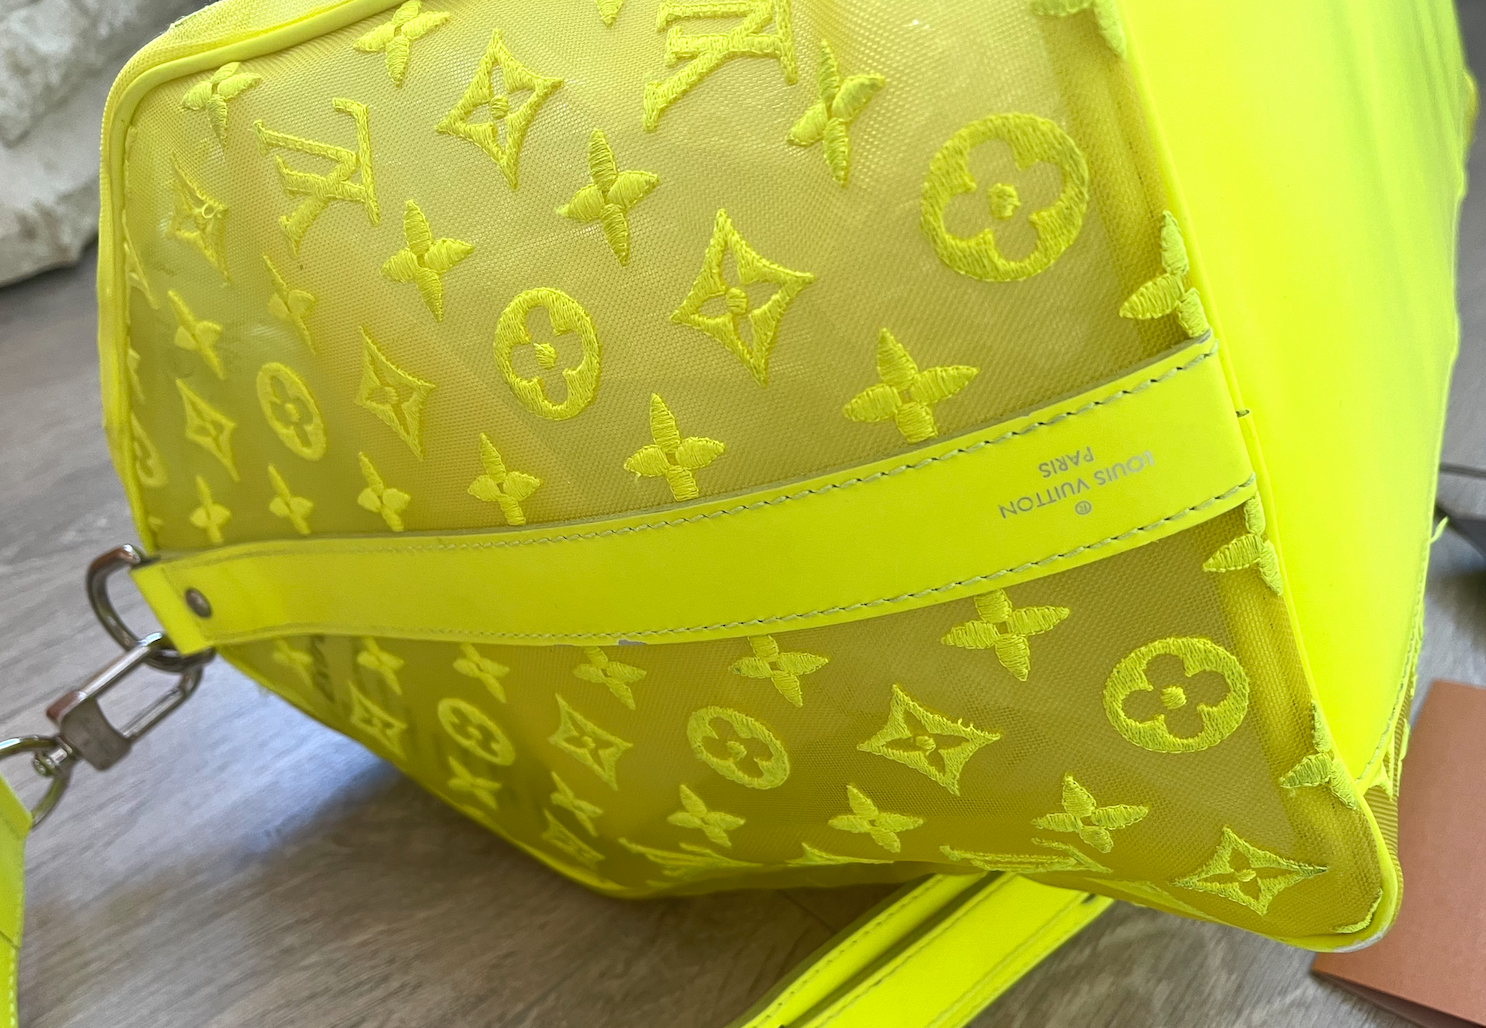 Louis Vuitton Duo Sling Bag Neon Yellow in Monogram Coated Canvas